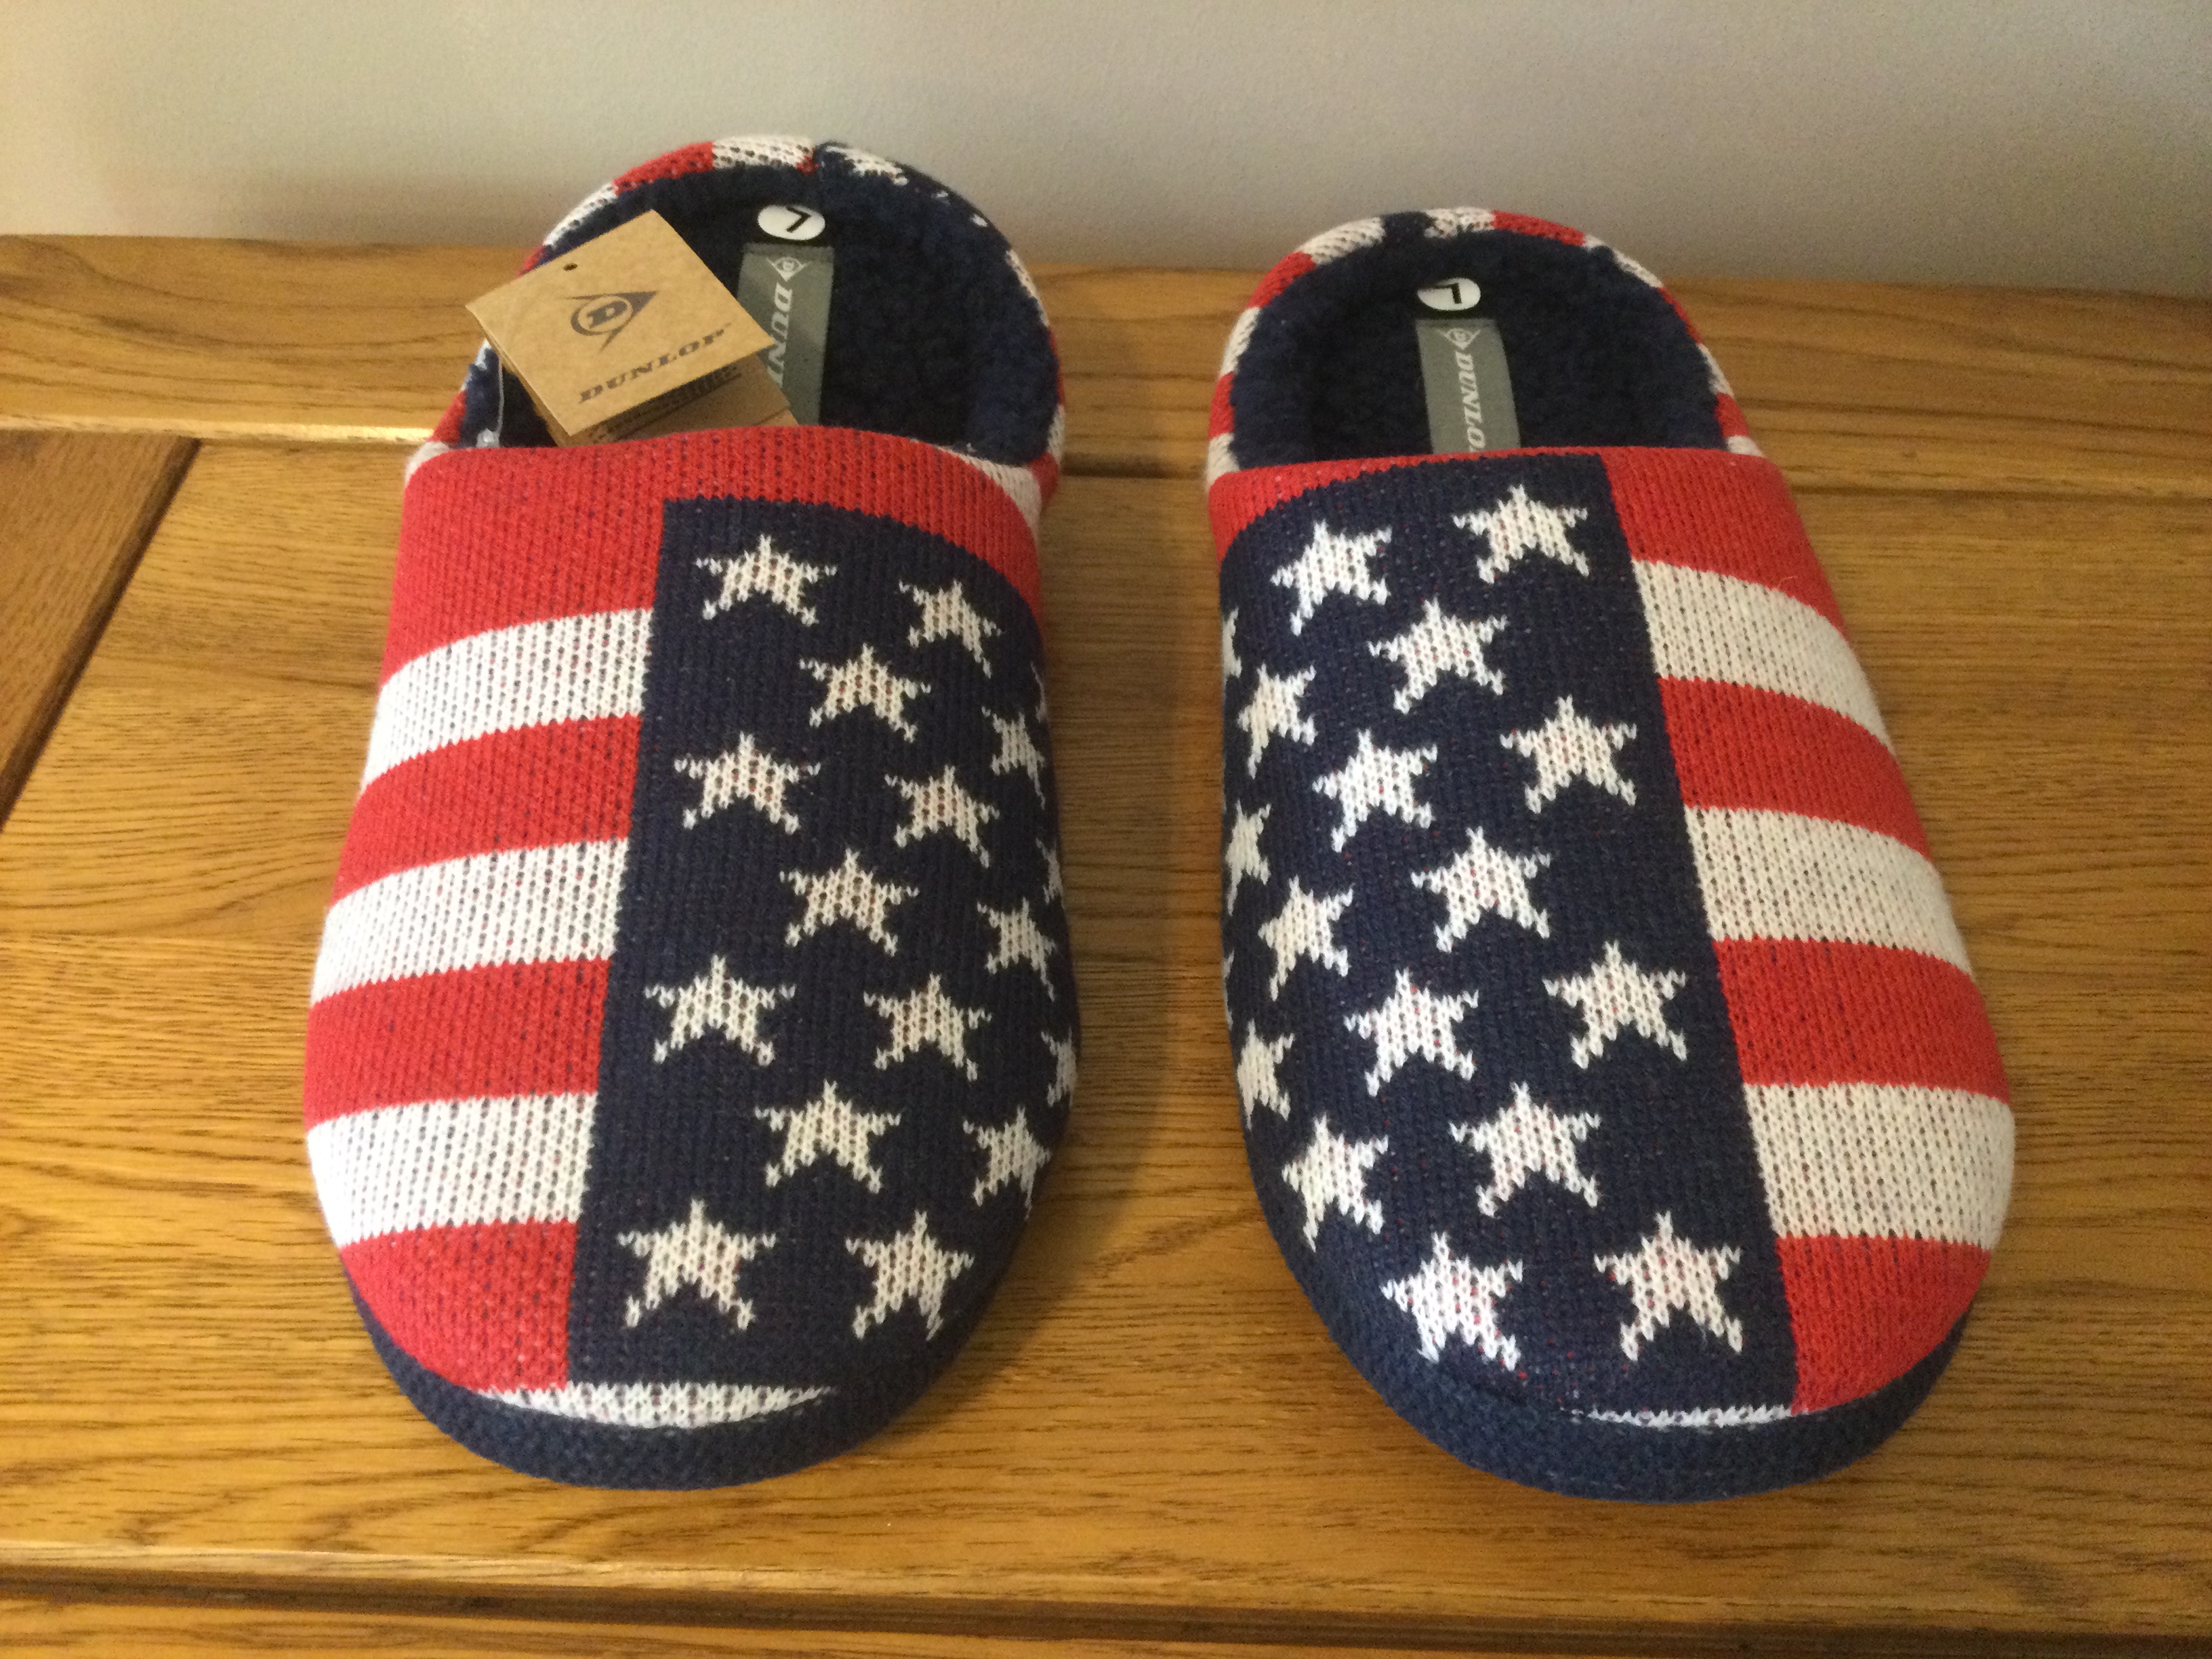 Job Lot 10 x Pairs Men's Dunlop, “USA Stars and Stripes” Memory Foam, Mule Slippers, Size L (10/1... - Image 4 of 7